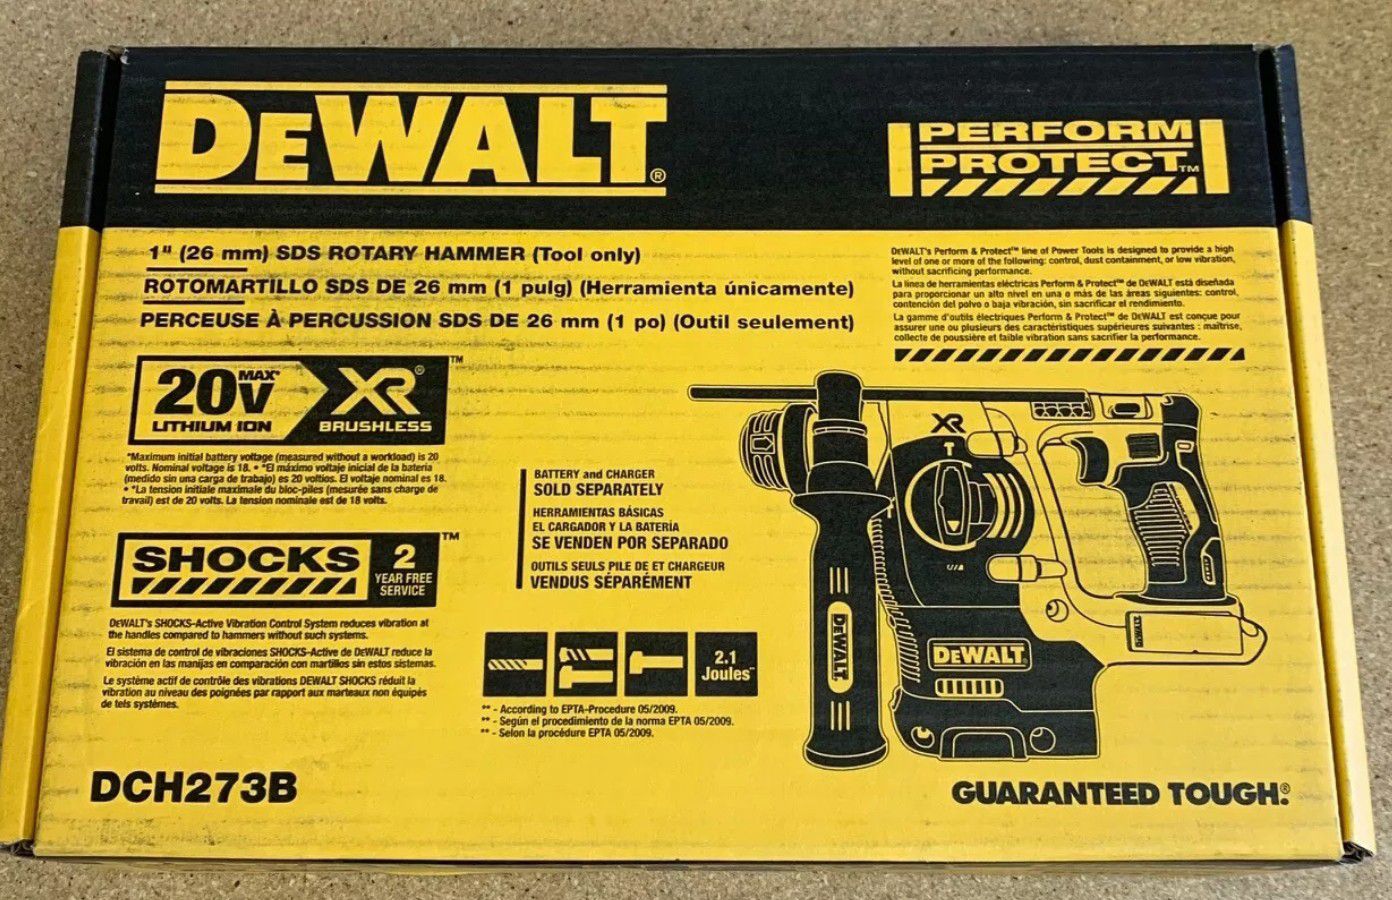 Brand New Dewalt 1" SDS Rotary Hammer / Drill Model DCH273B - TOOL ONLY - Brand New in the Box!!!